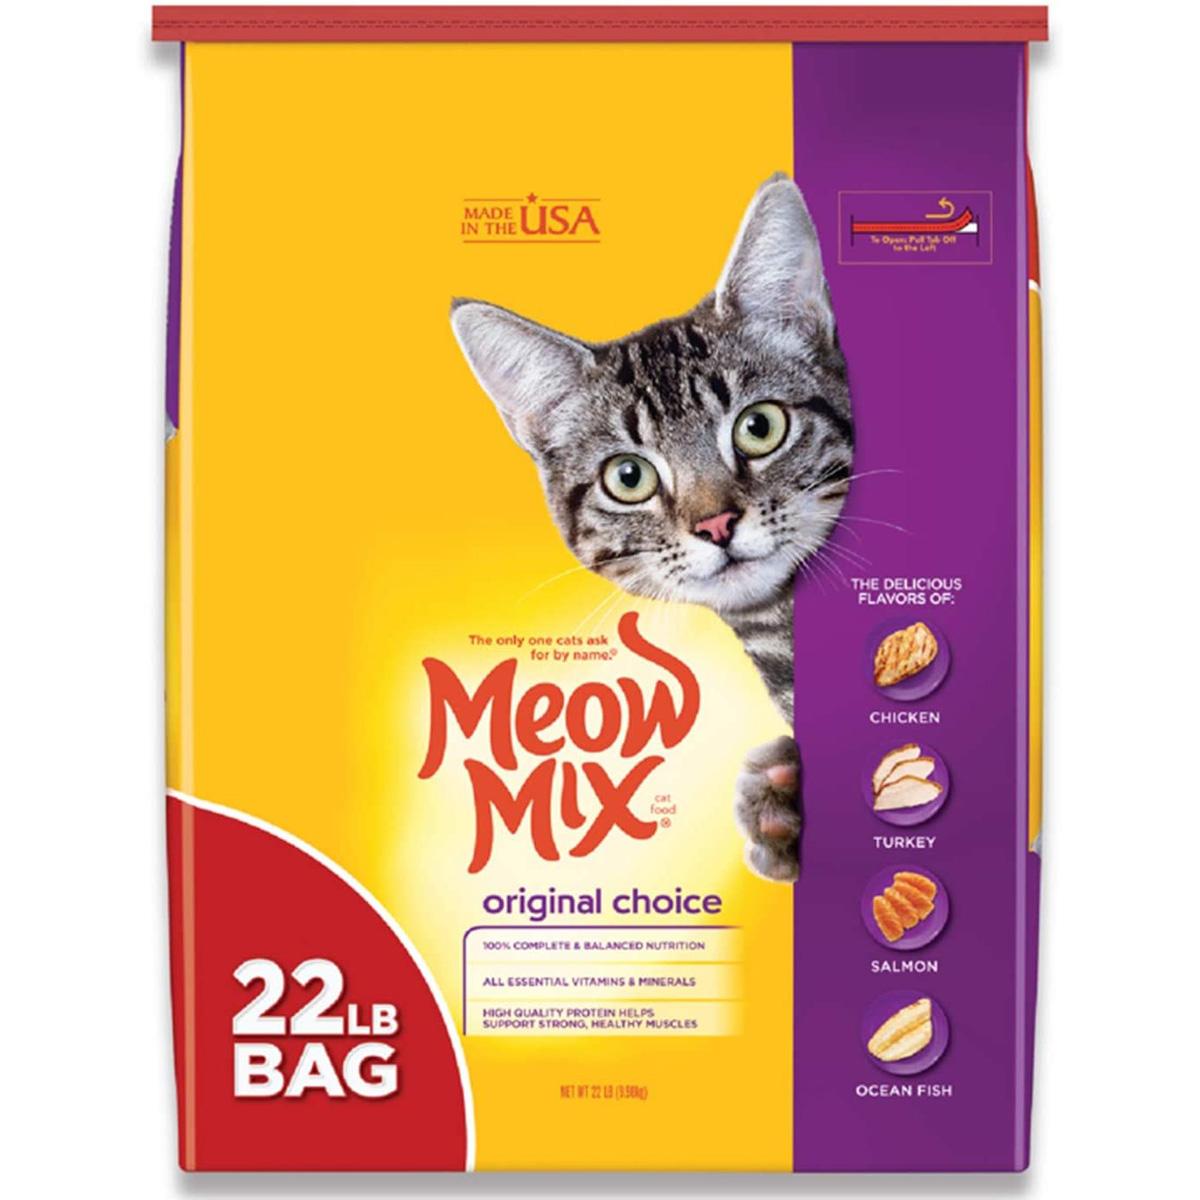 Meow Mix Original Choice Dry Cat Food 22lbs for $10.65 Shipped